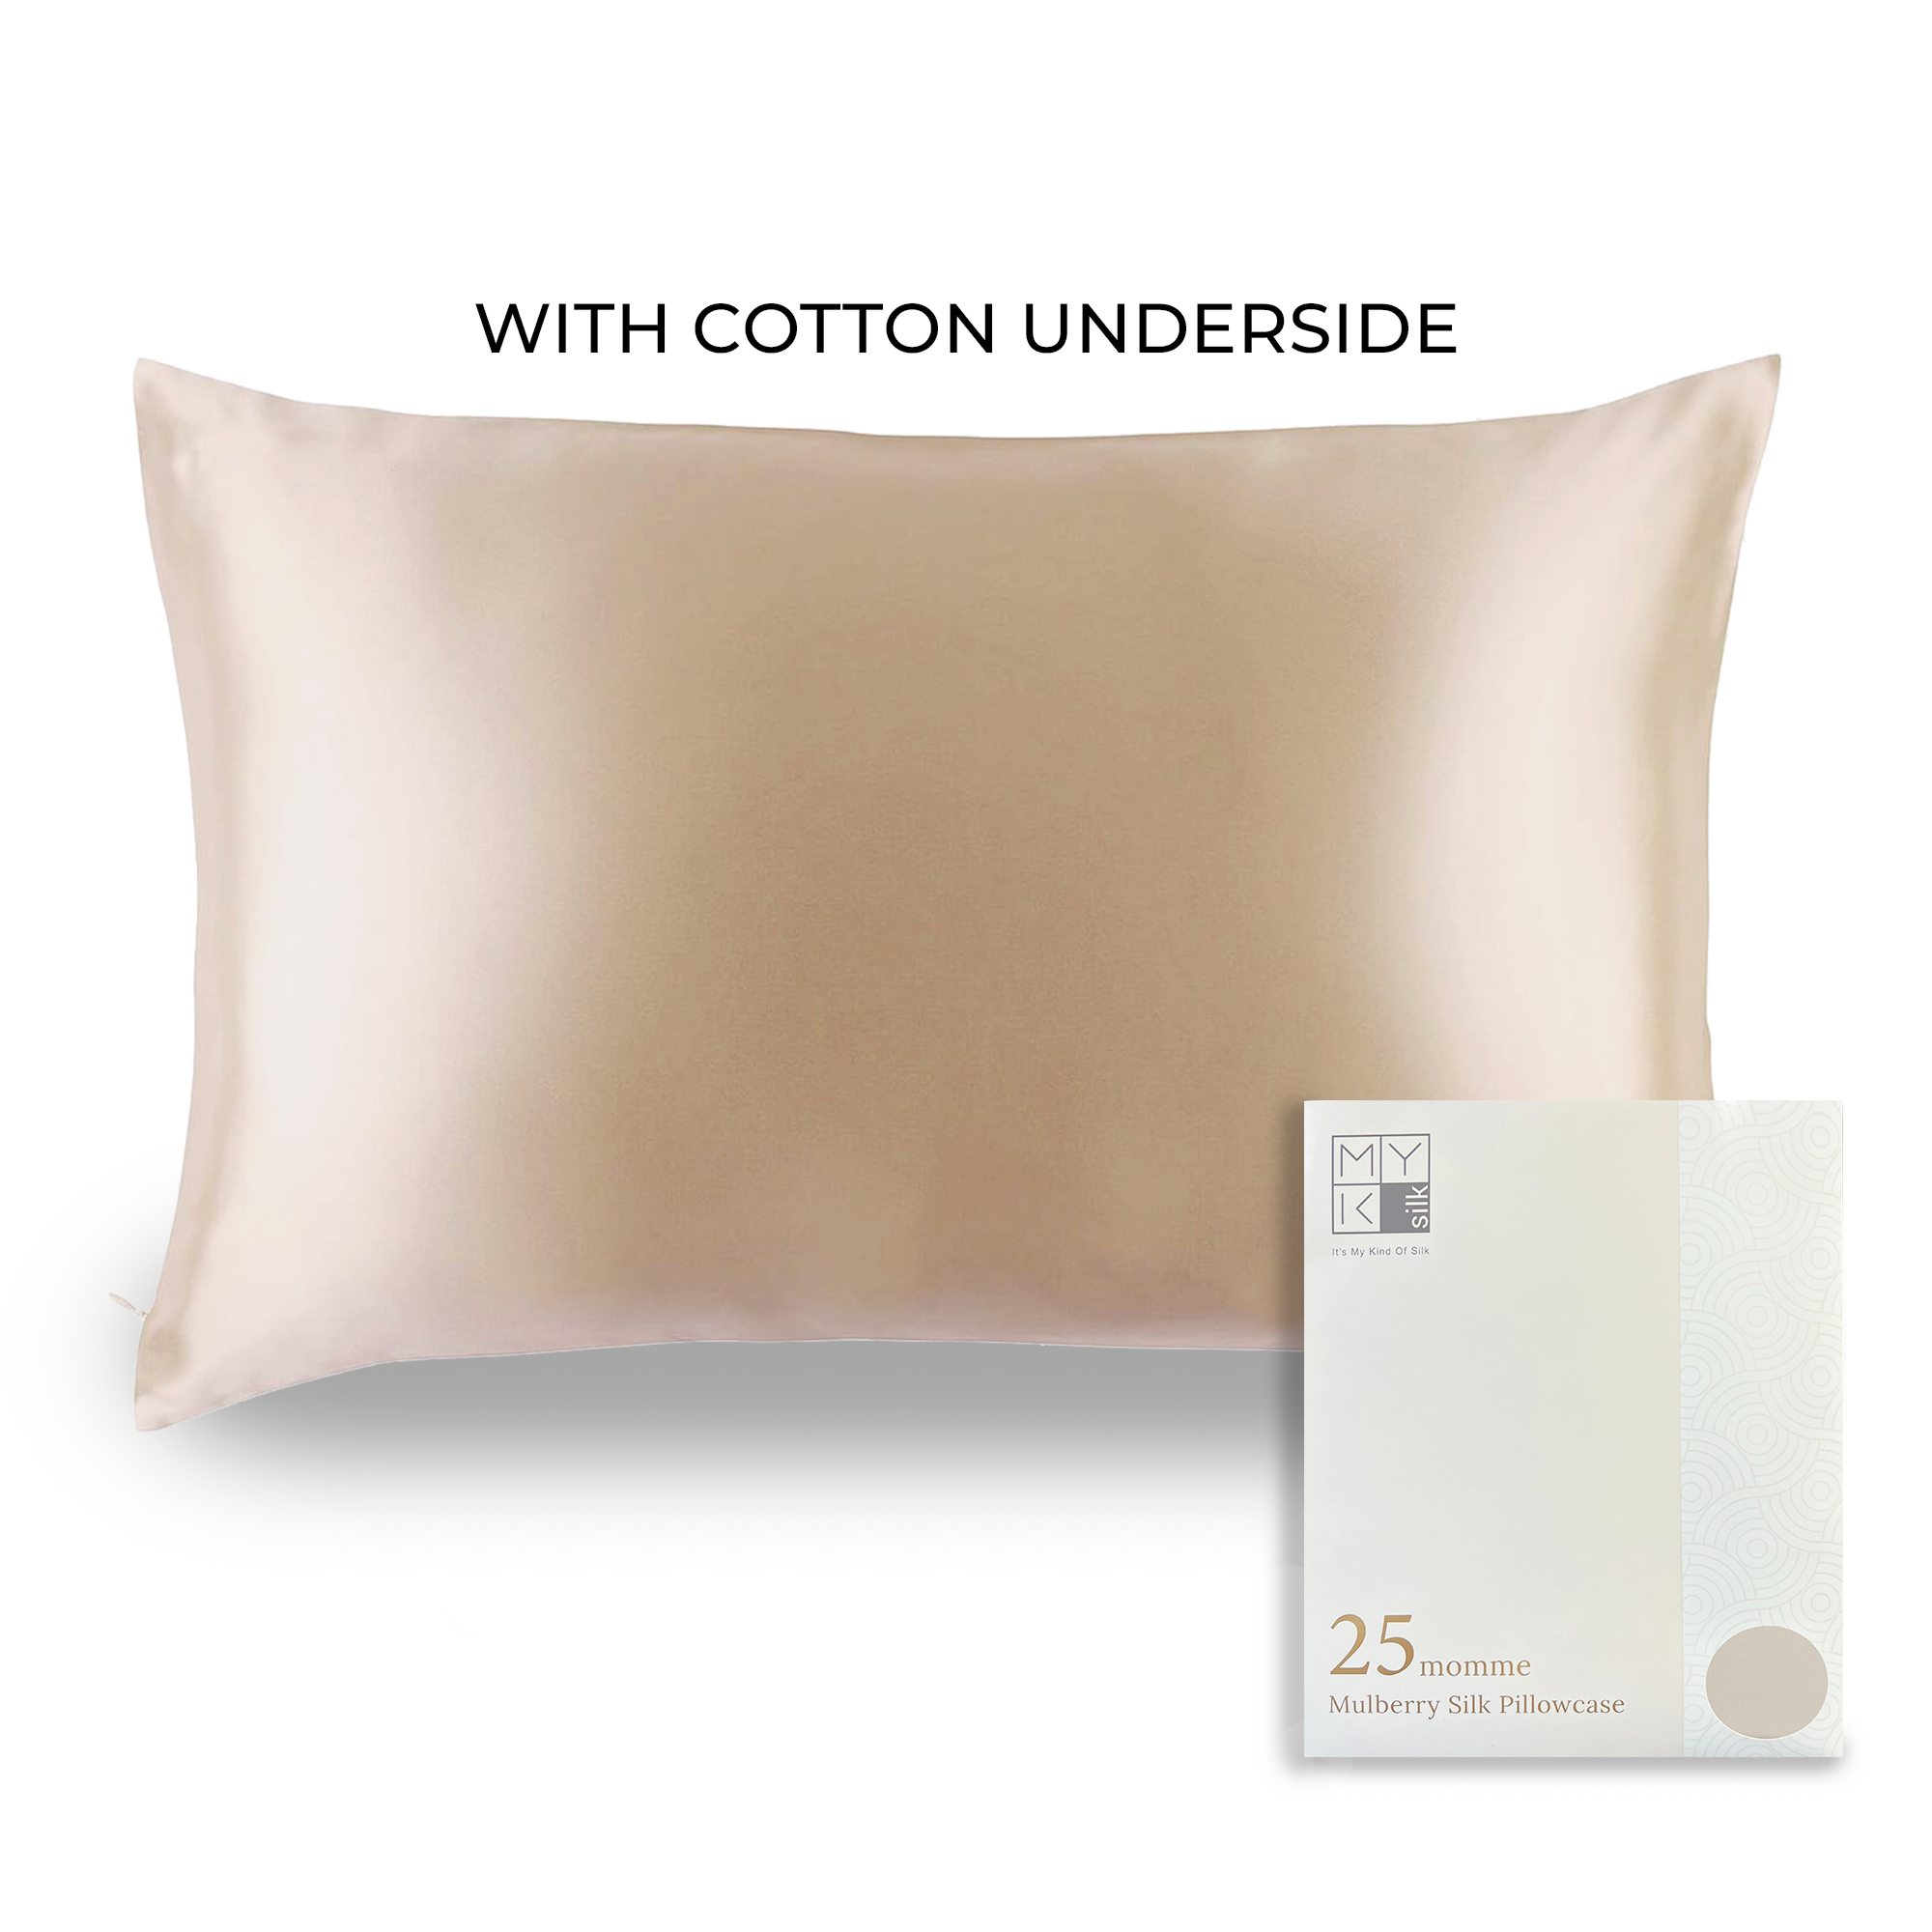 Products Luxury Mulberry Silk Pillowcase with Cotton Underside (25 momme) - MYK Silk #color_beige